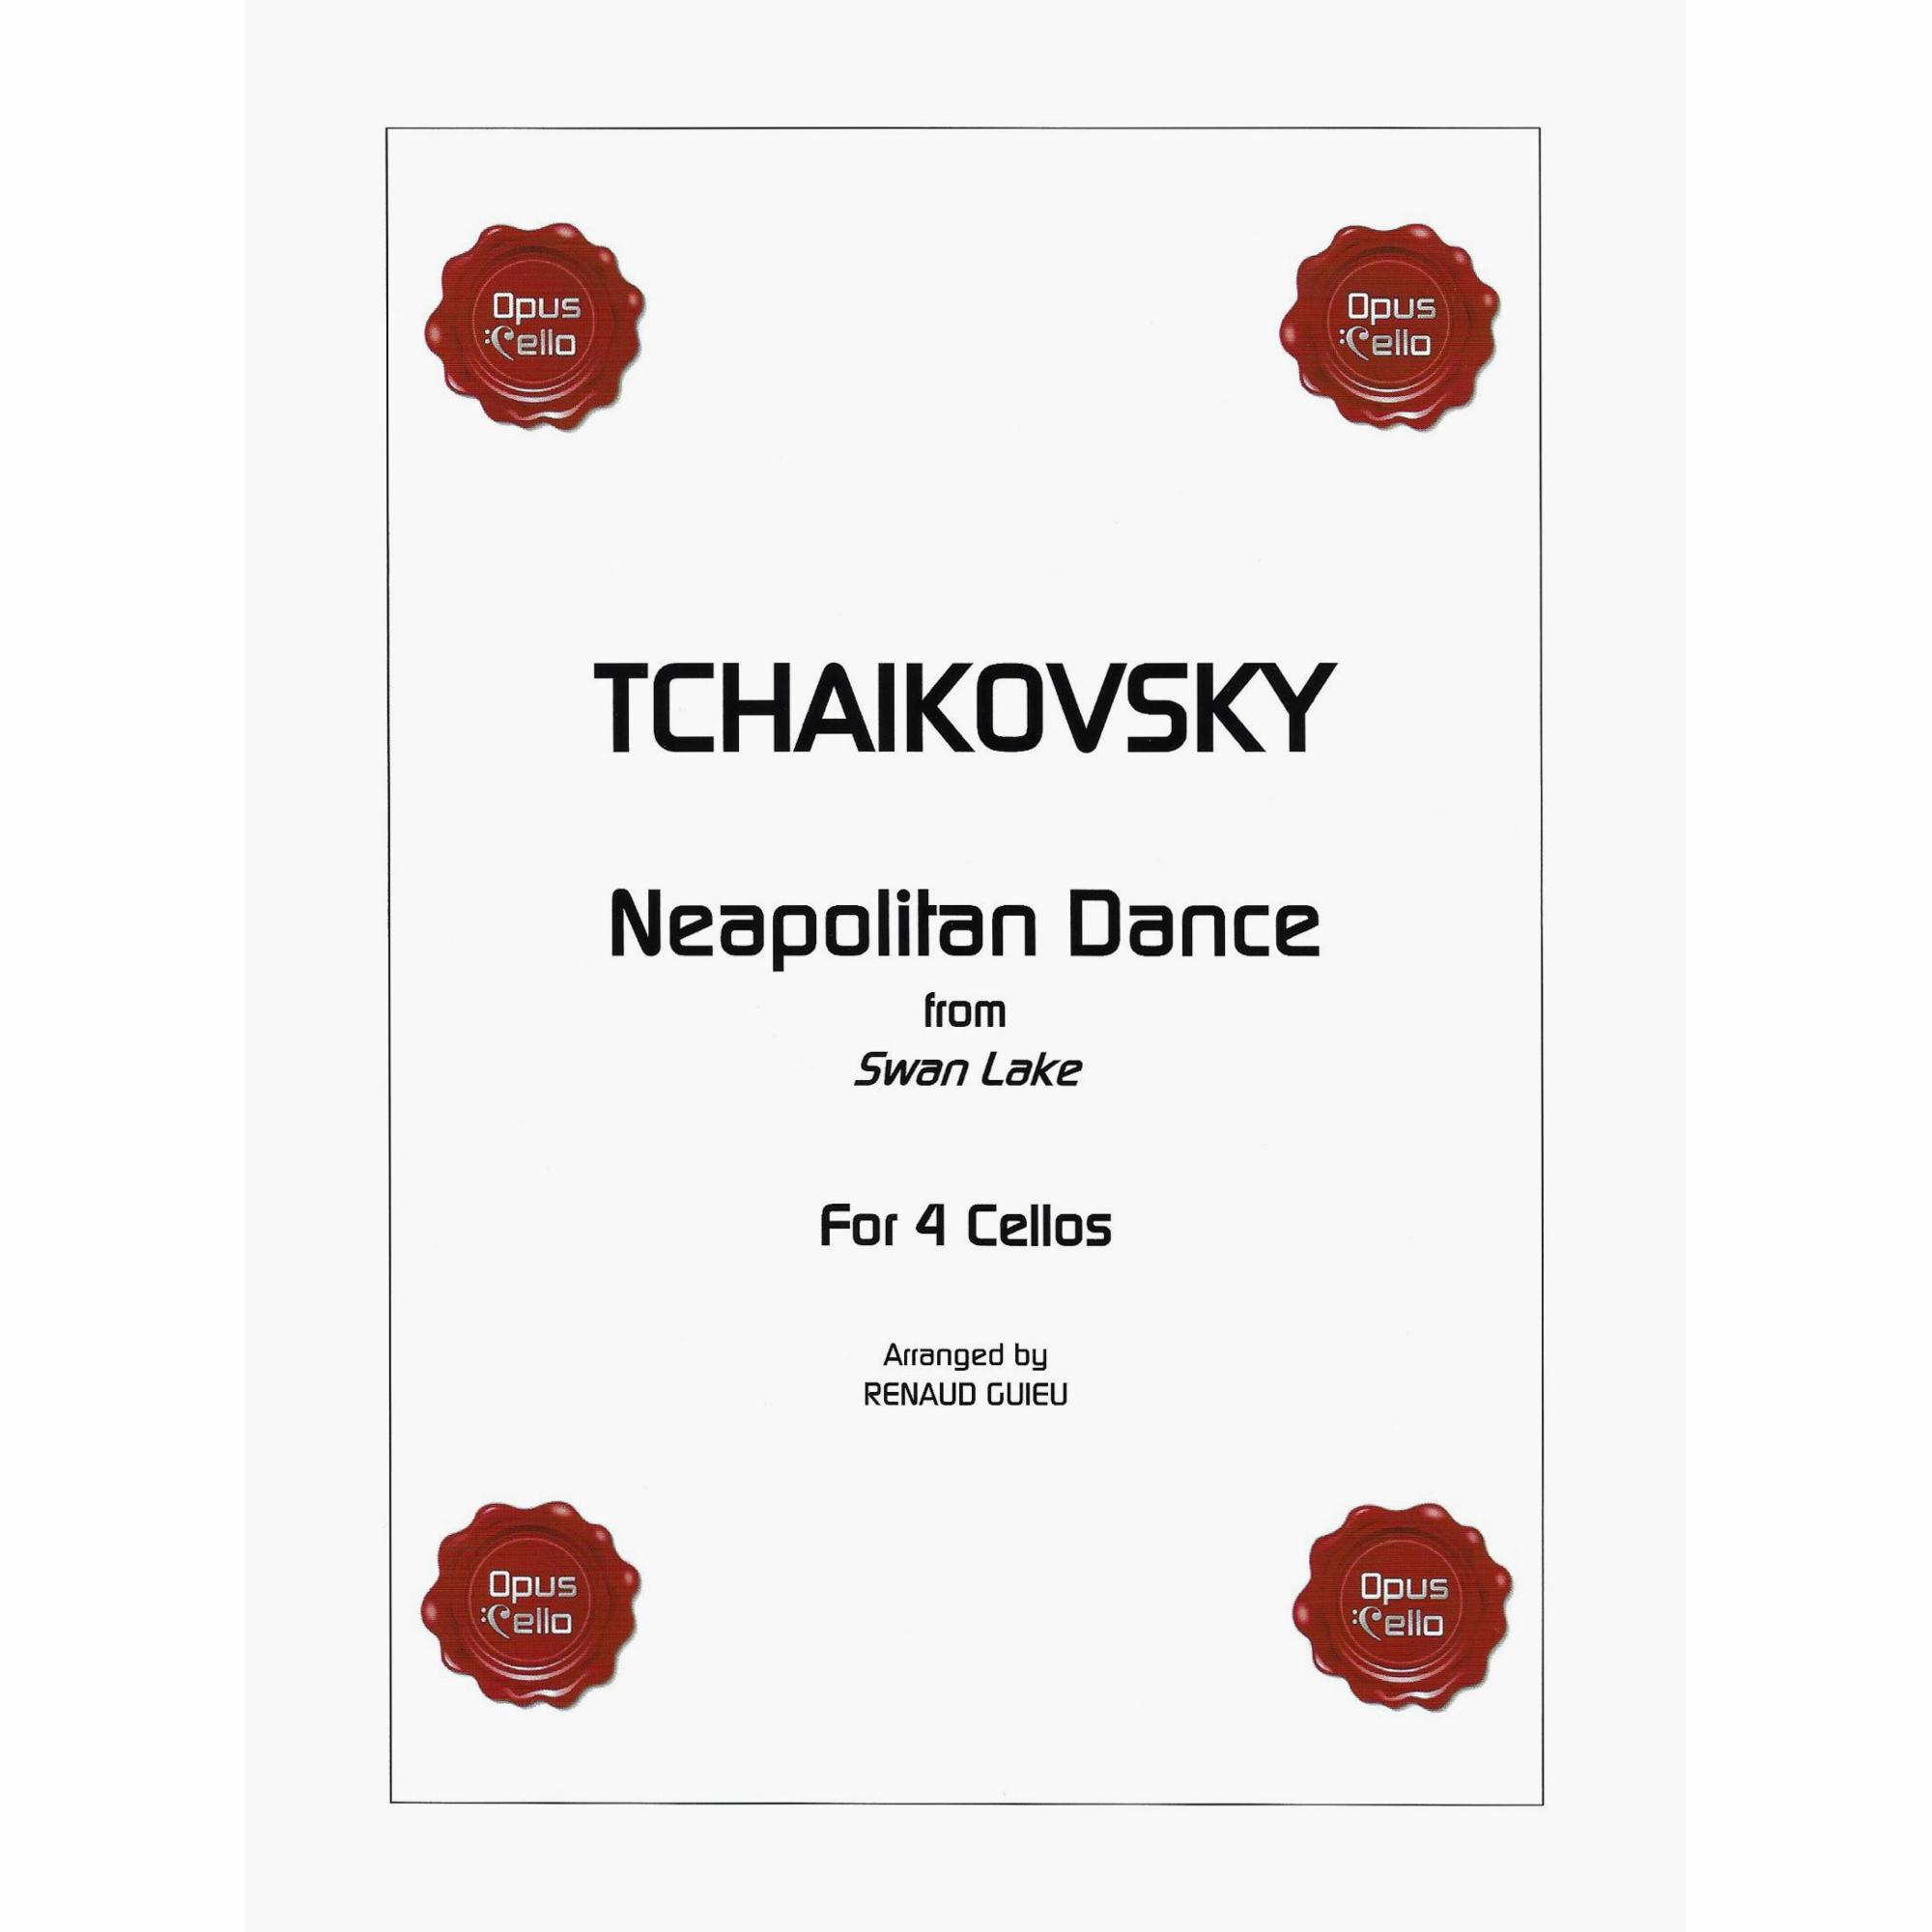 Tchaikovsky -- Neapolitan Dance from Swan Lake for Four Cellos